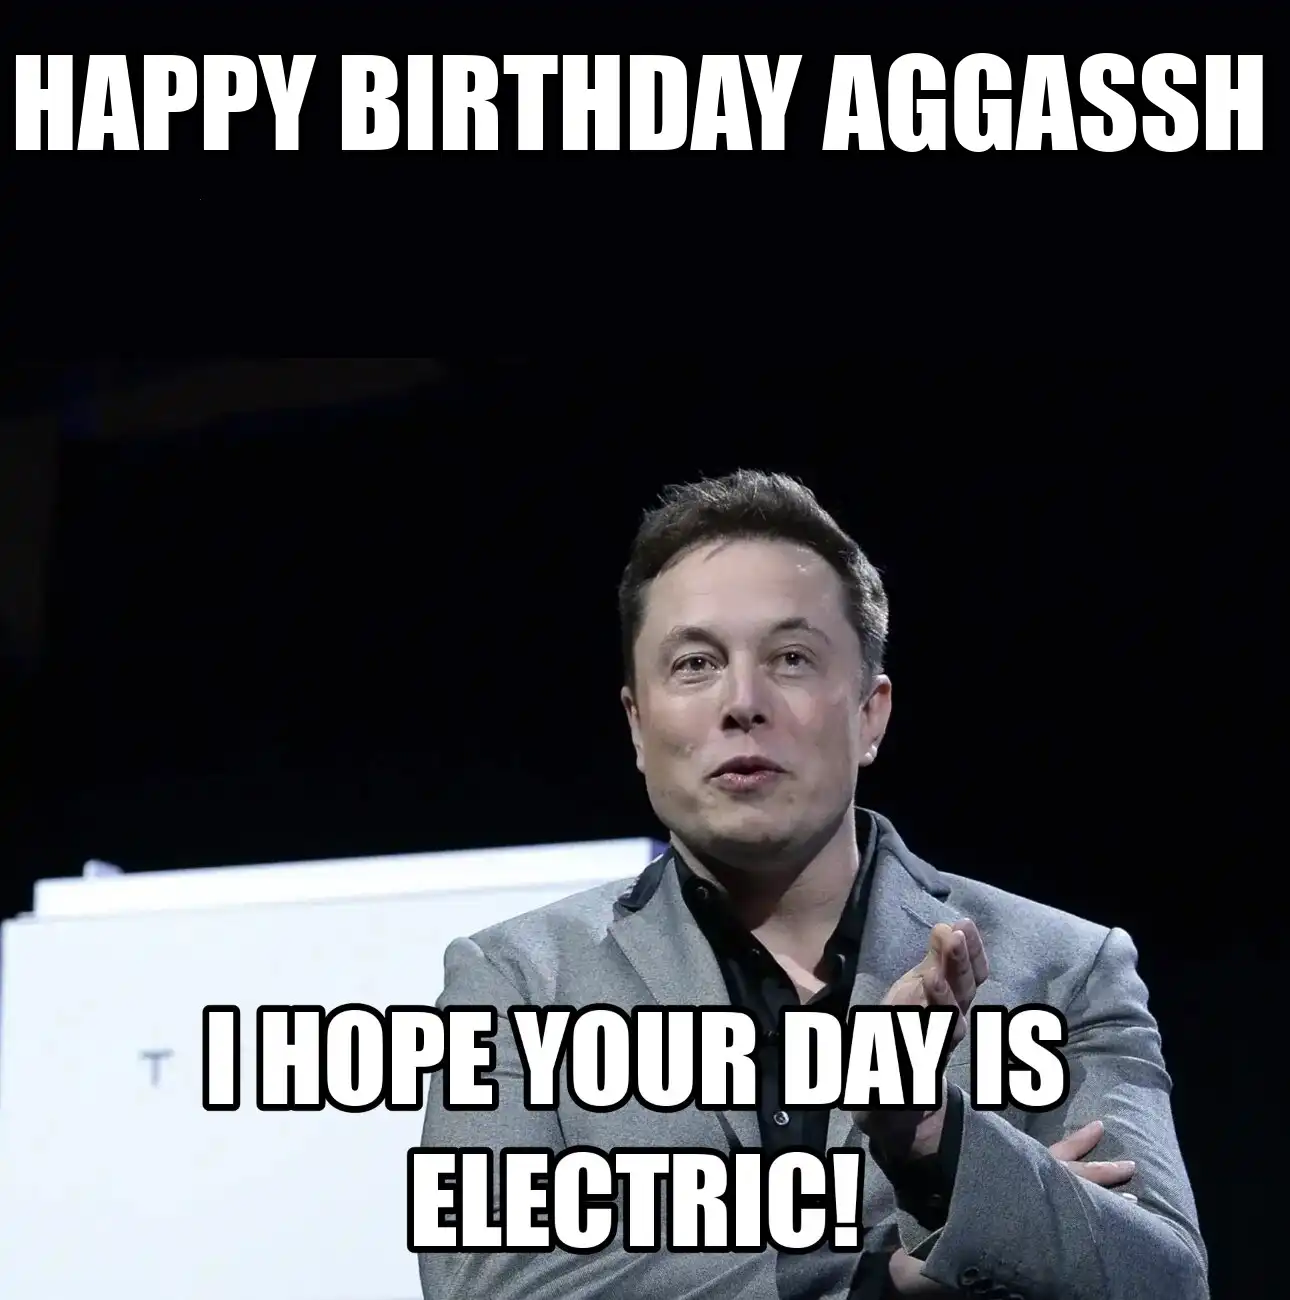 Happy Birthday Aggassh I Hope Your Day Is Electric Meme